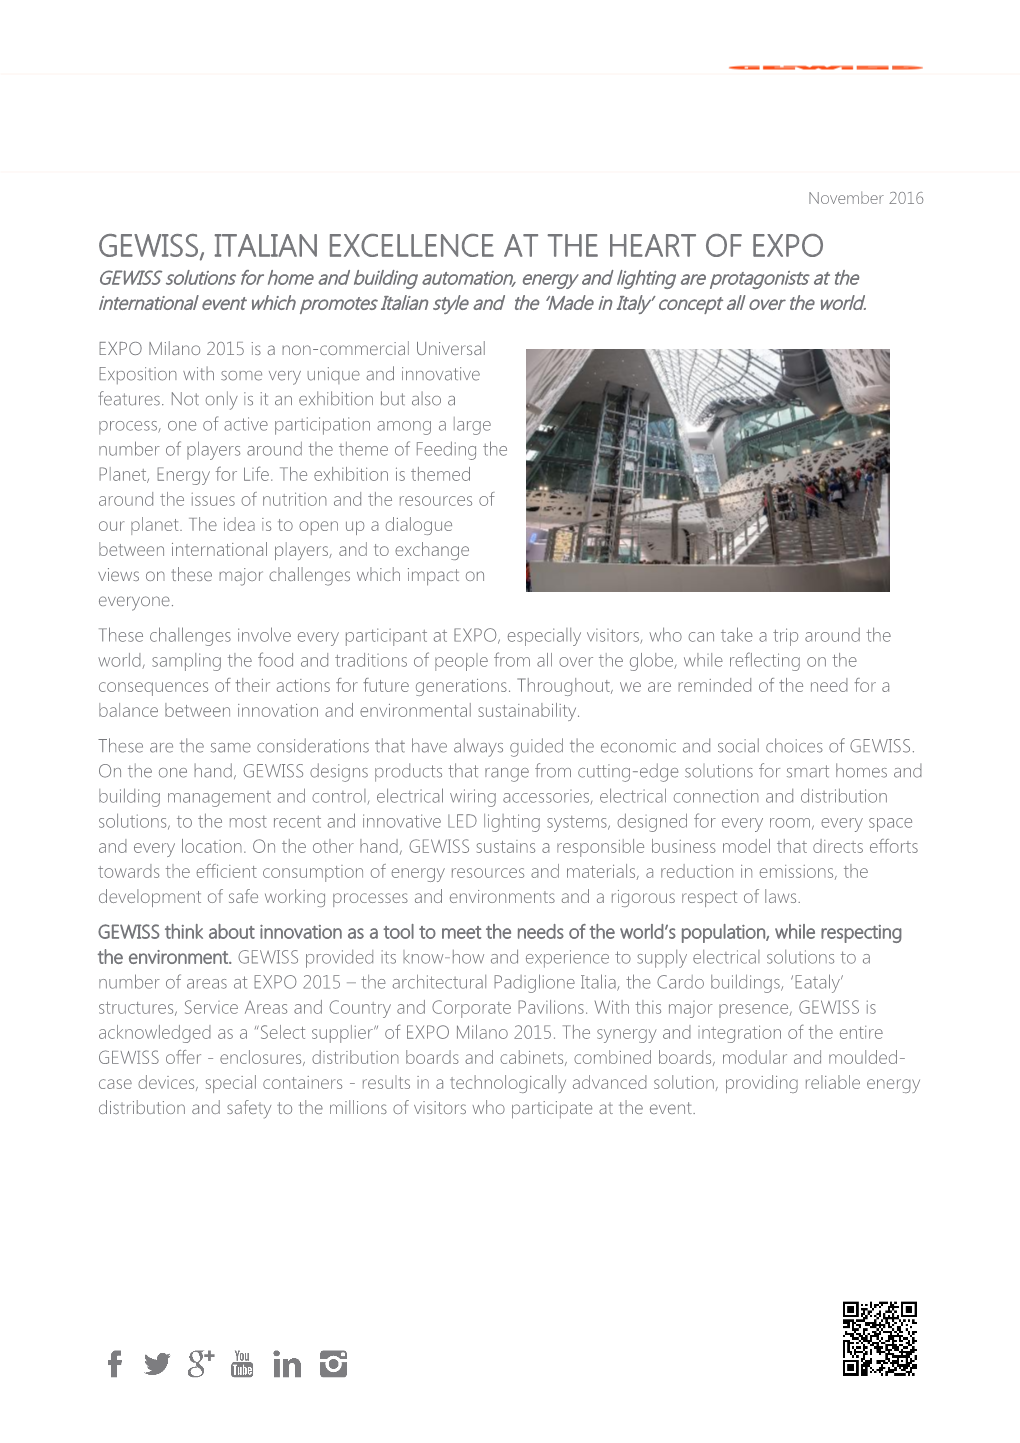 Gewiss, Italian Excellence at the Heart of Expo